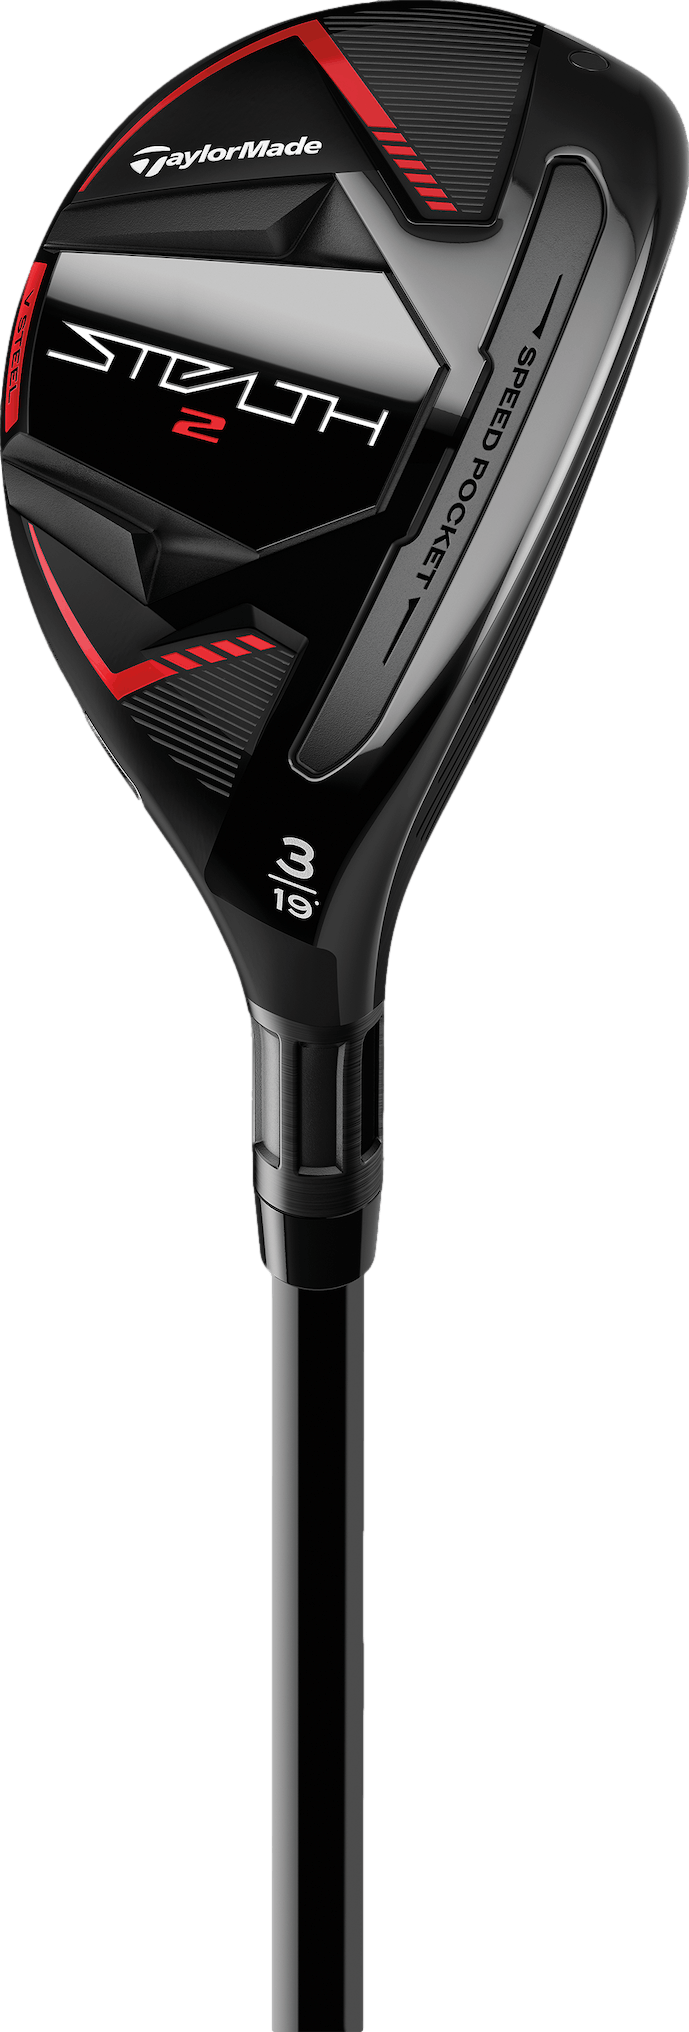 clearance outlets Wilson Dynapower #3 Hybrid / 19 Degree / Stiff